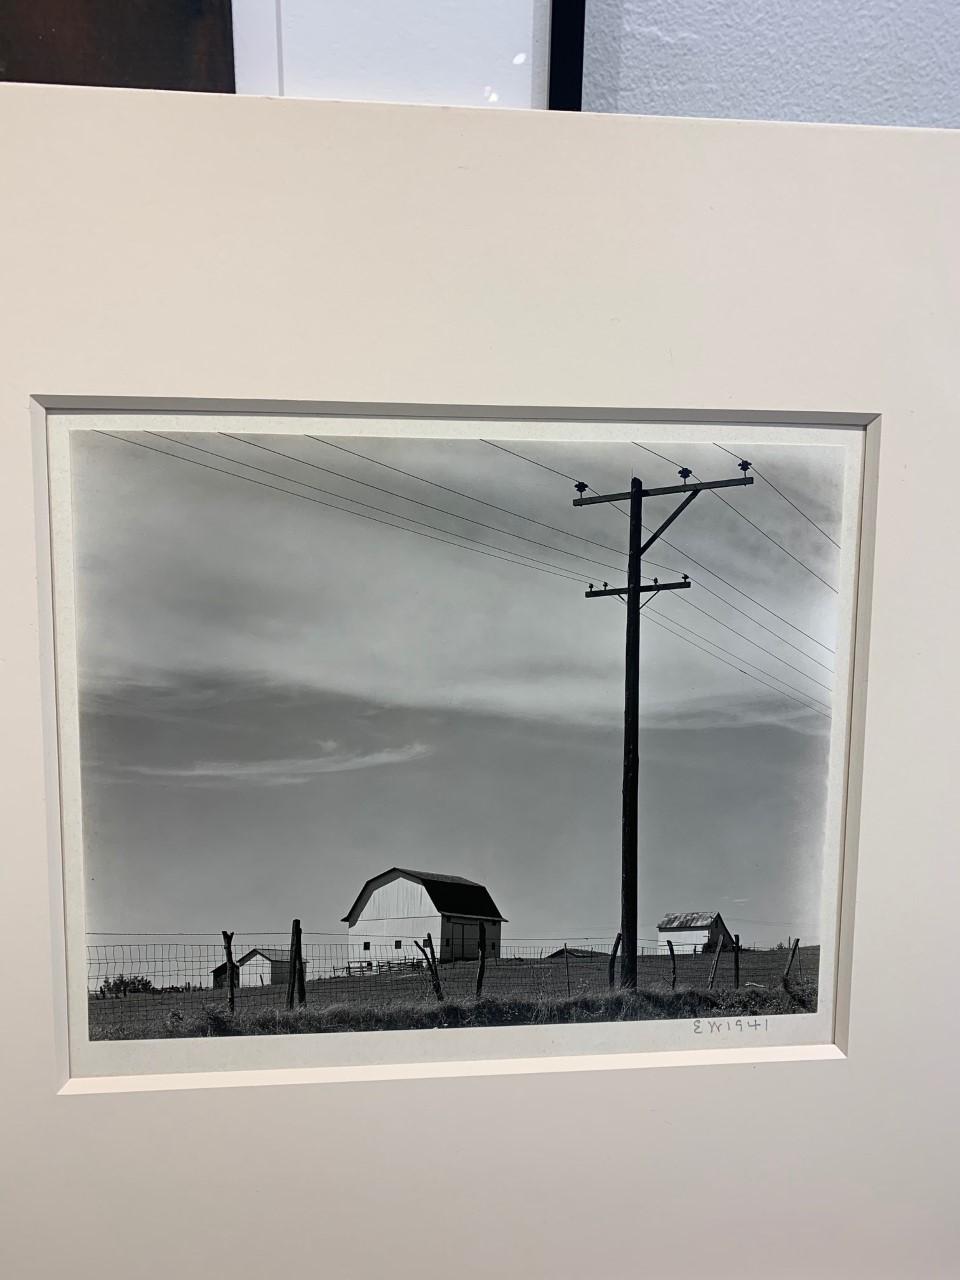 Untitled, Barn and Telephone Poles - Photograph by Edward Weston